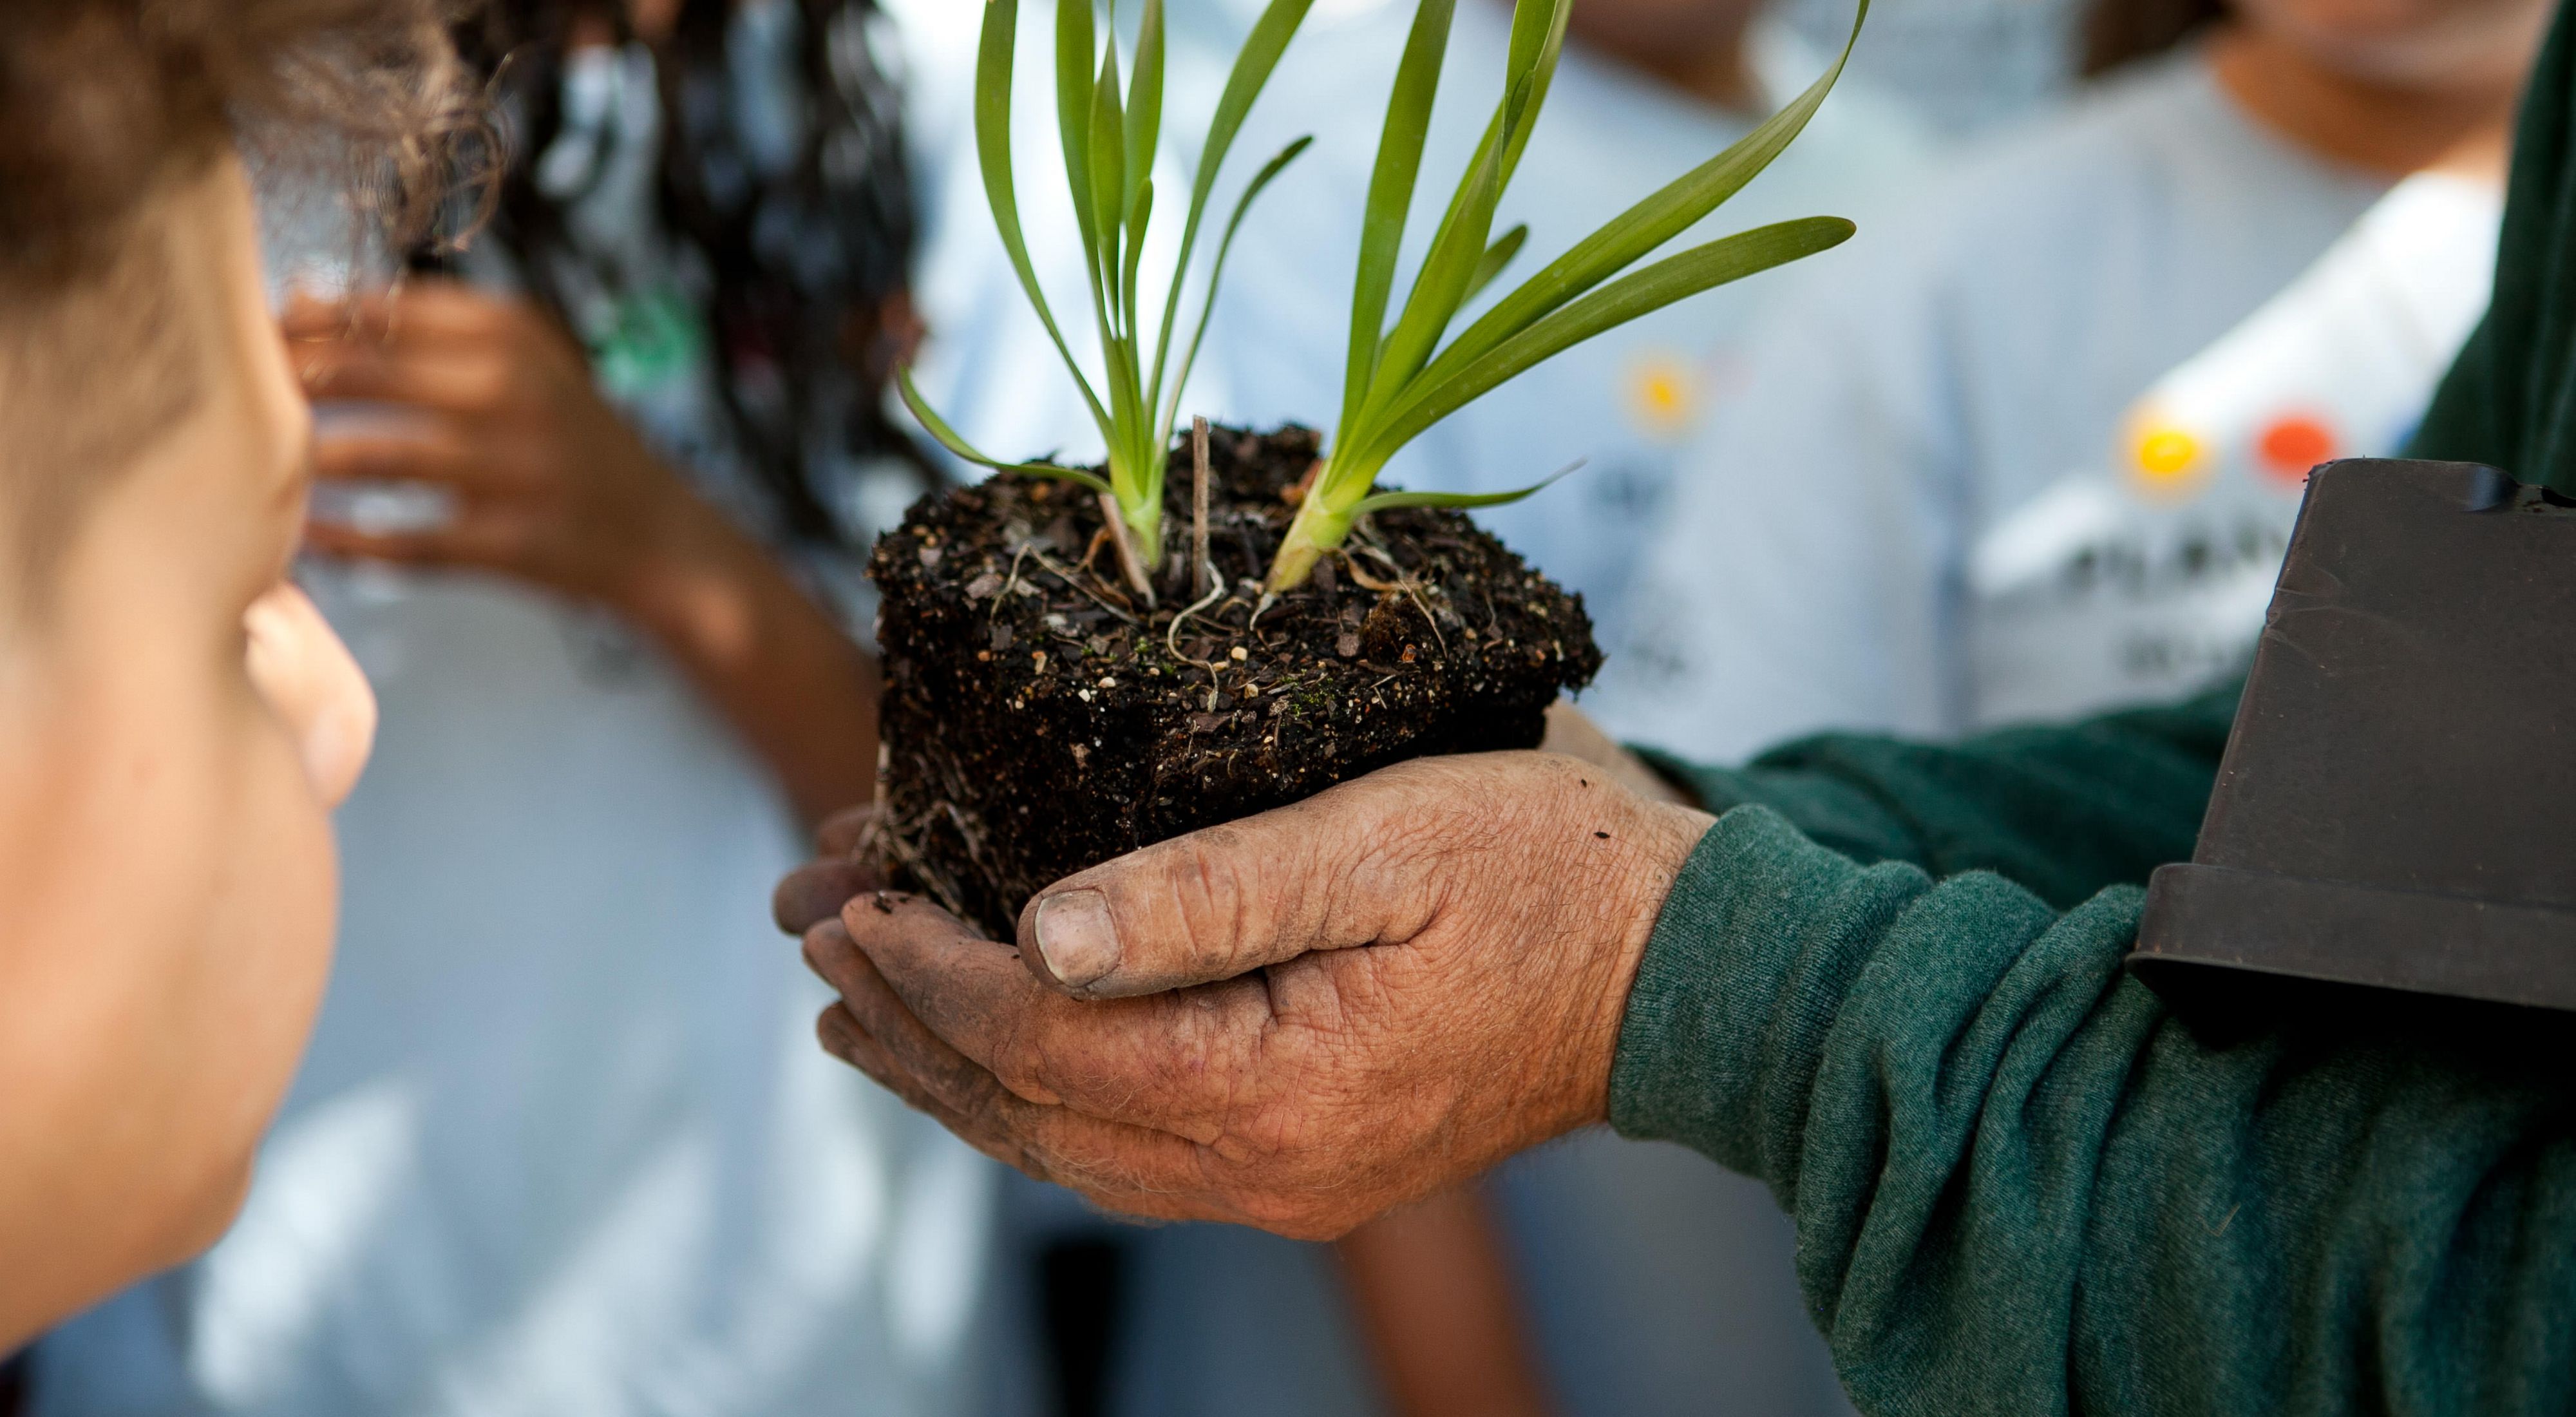 A seedling is held by a volunteer's hands, showing it to the group of children around them. 